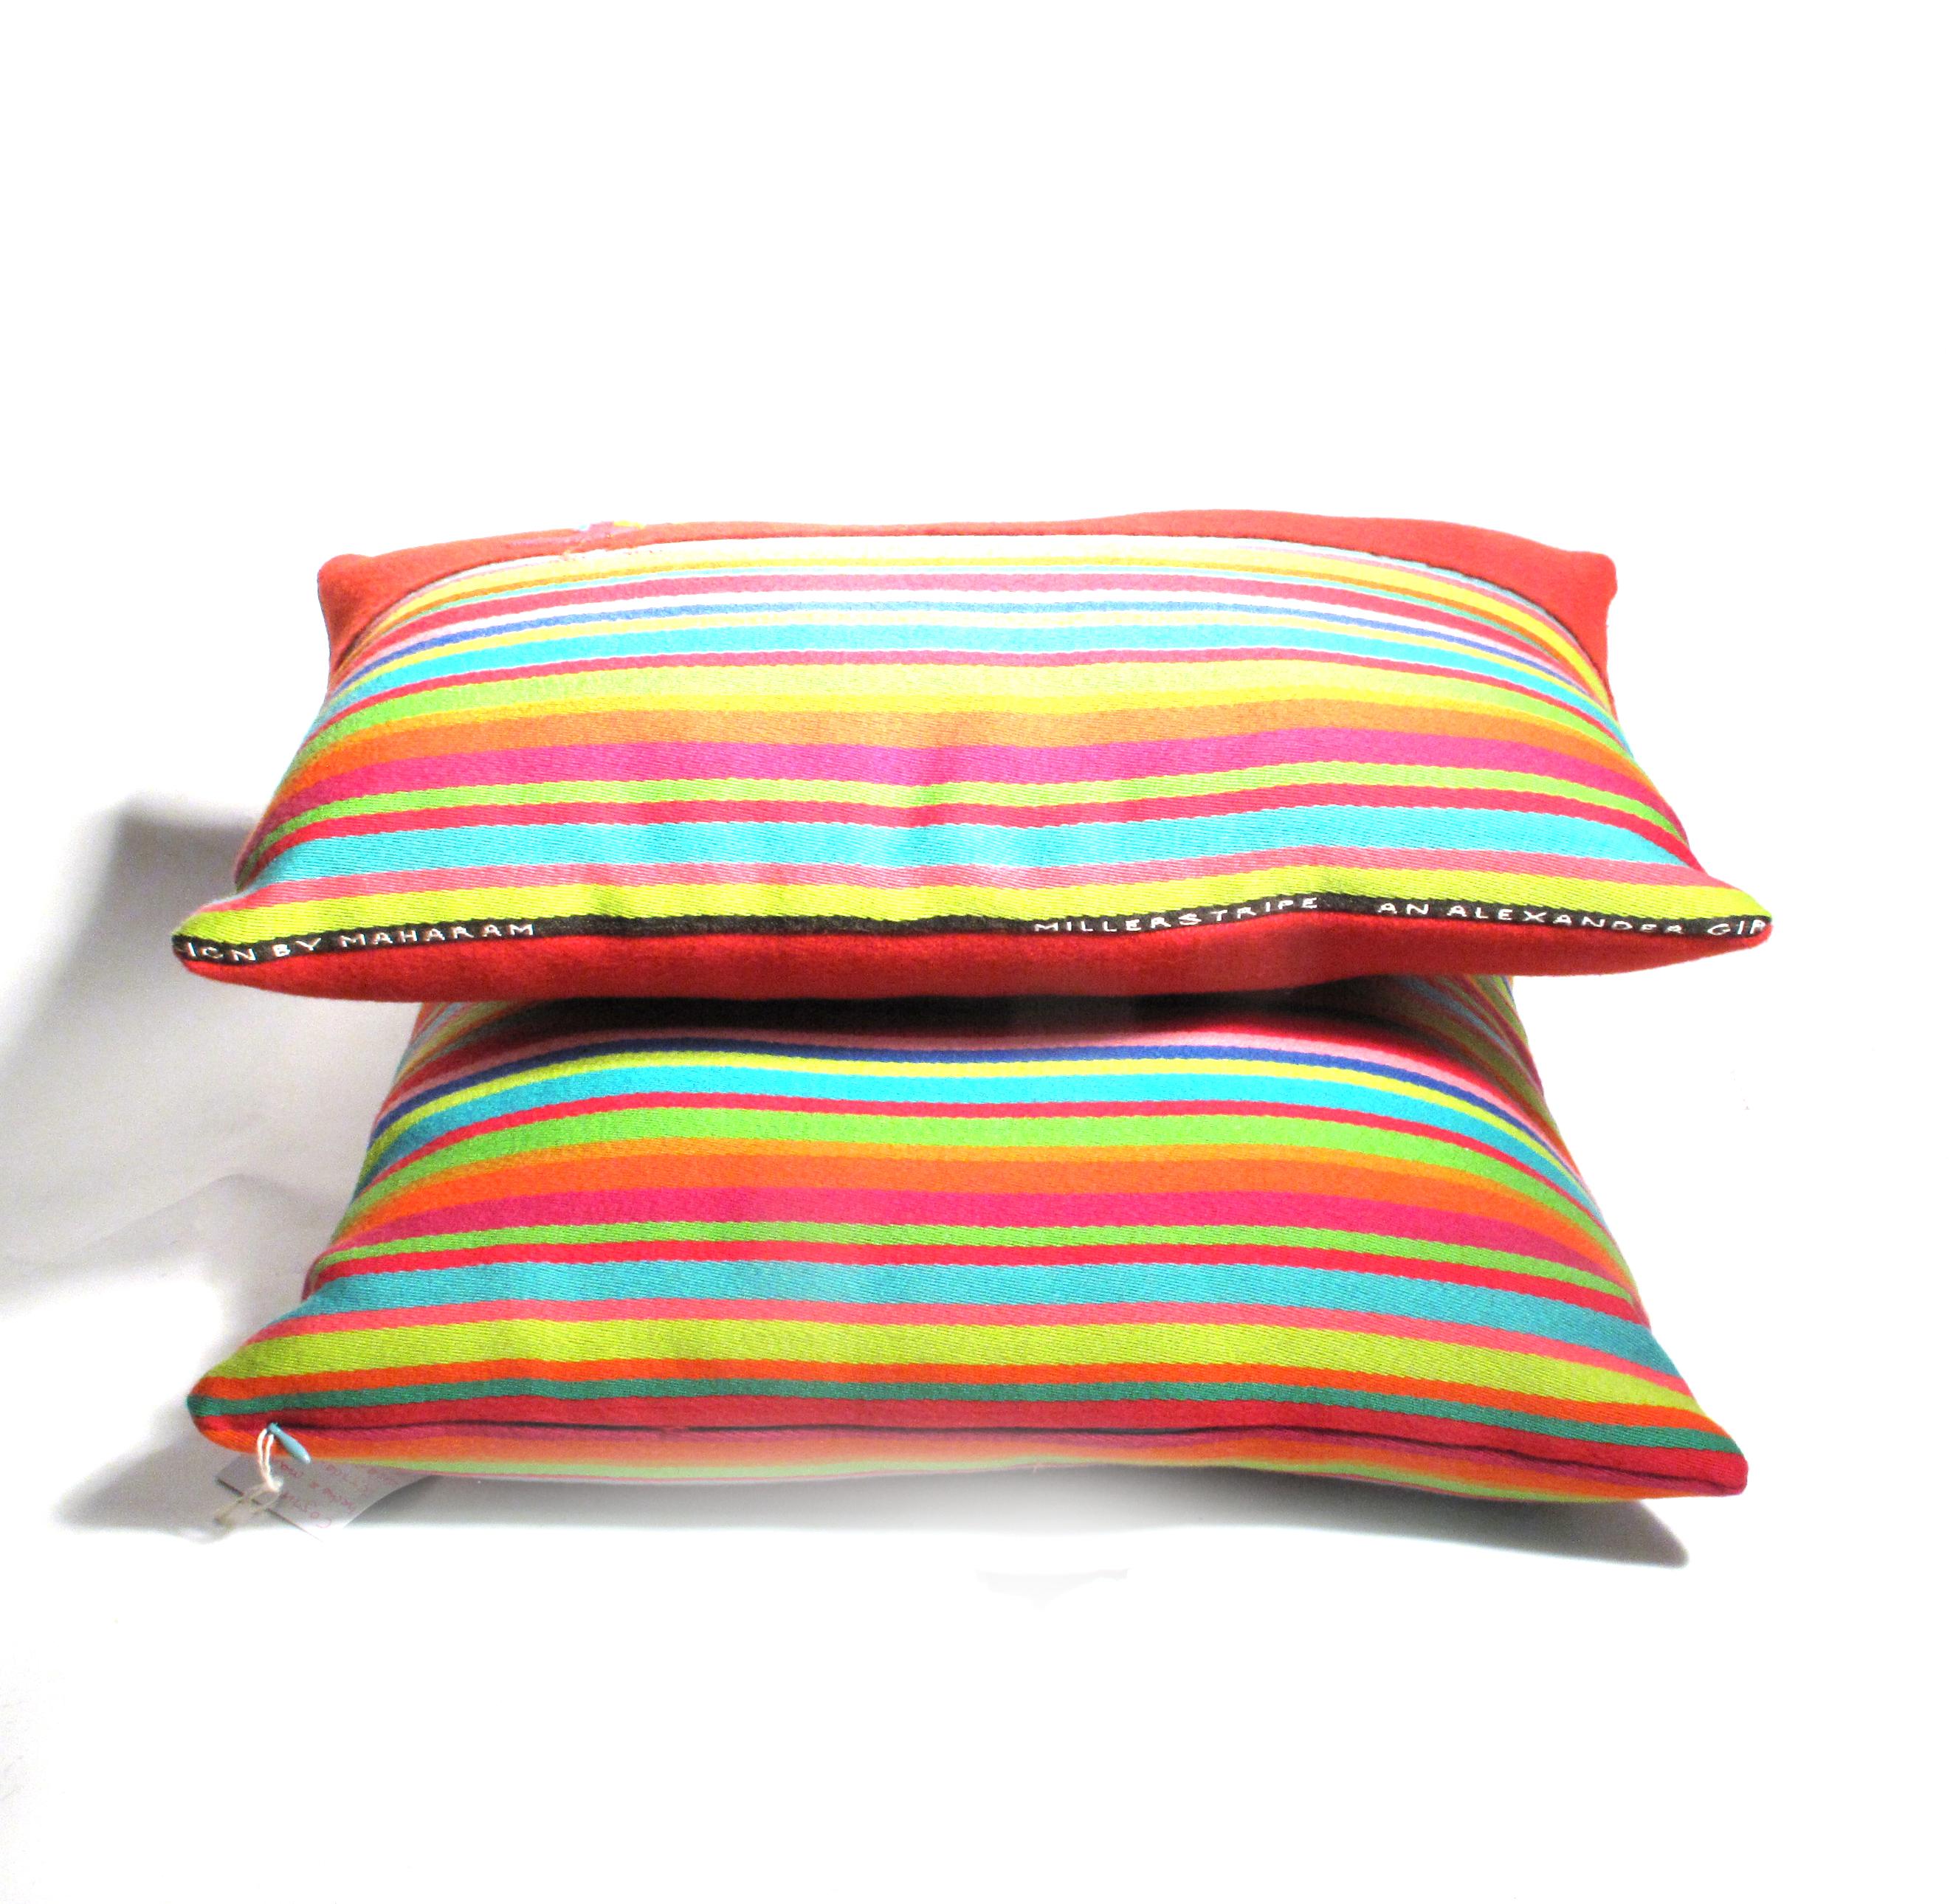 Handmade Cushions, Fabric Designed Alexander Girard for Maharan In New Condition For Sale In Bilbao, ES